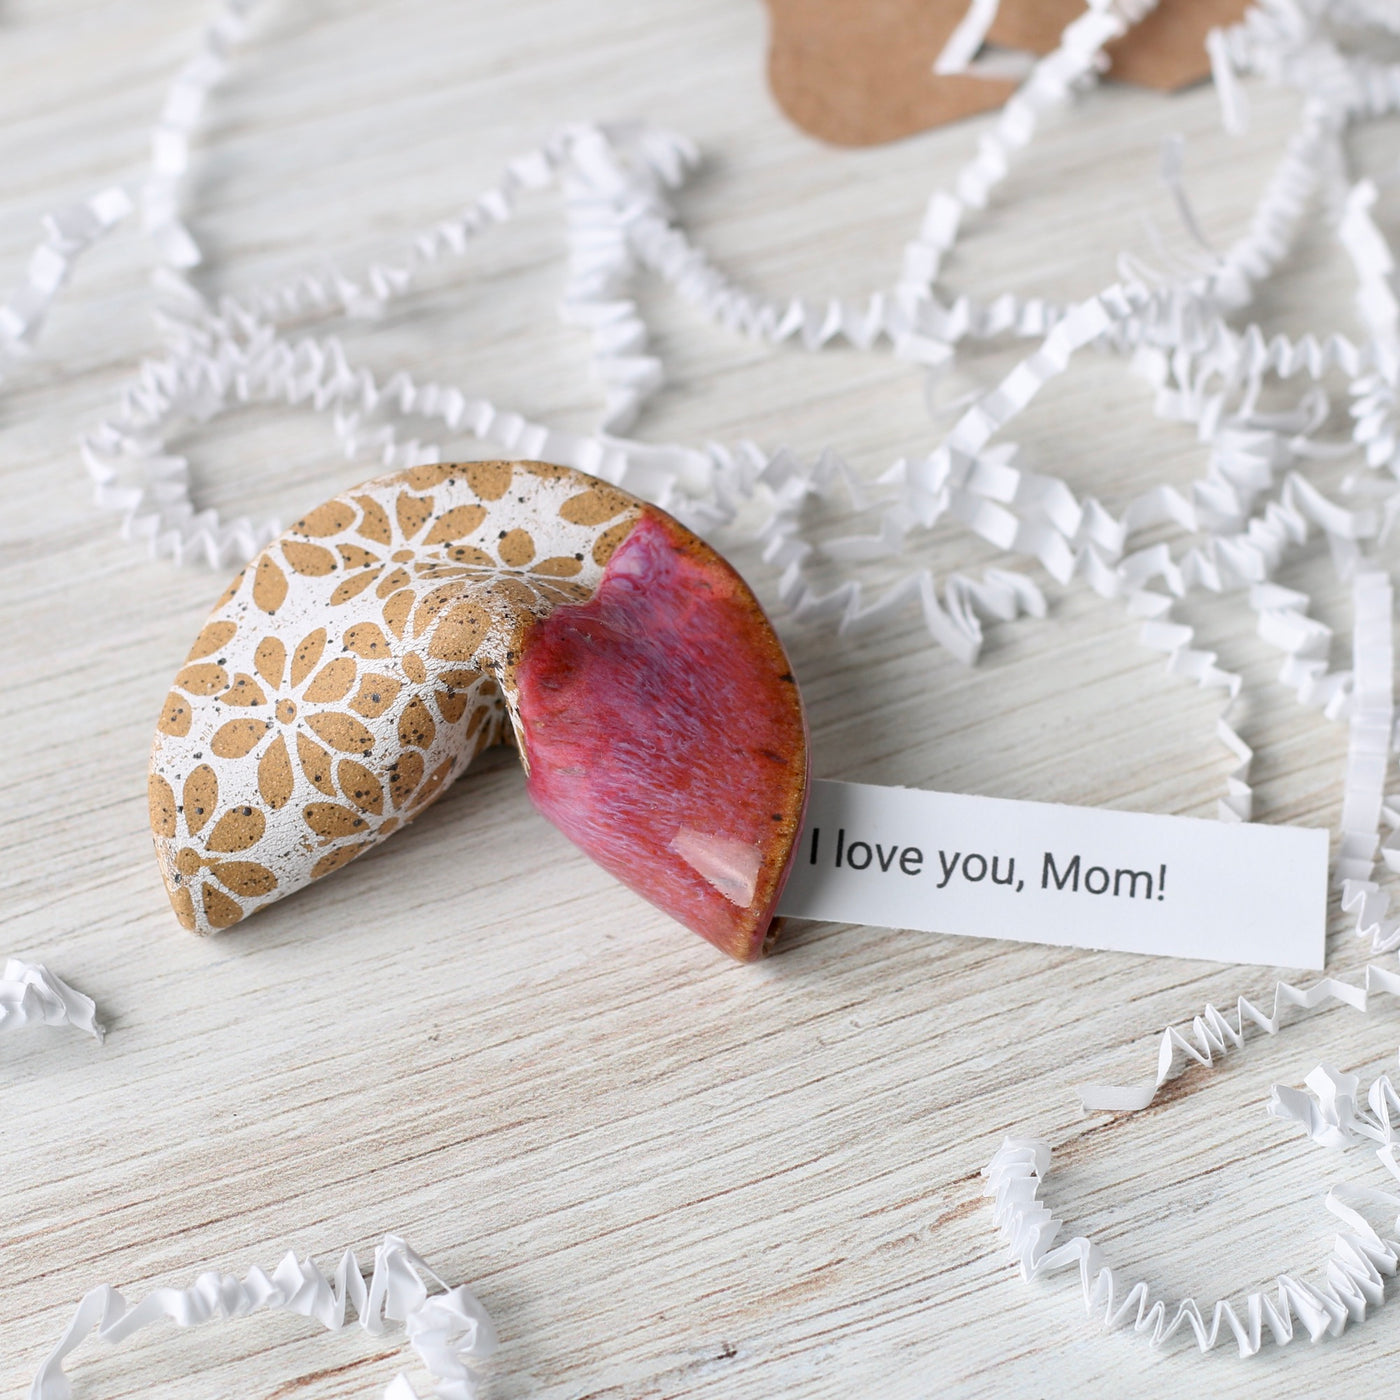 Personalized Ceramic Fortune Cookie- Pink with White Flowers- Speckled Stoneware